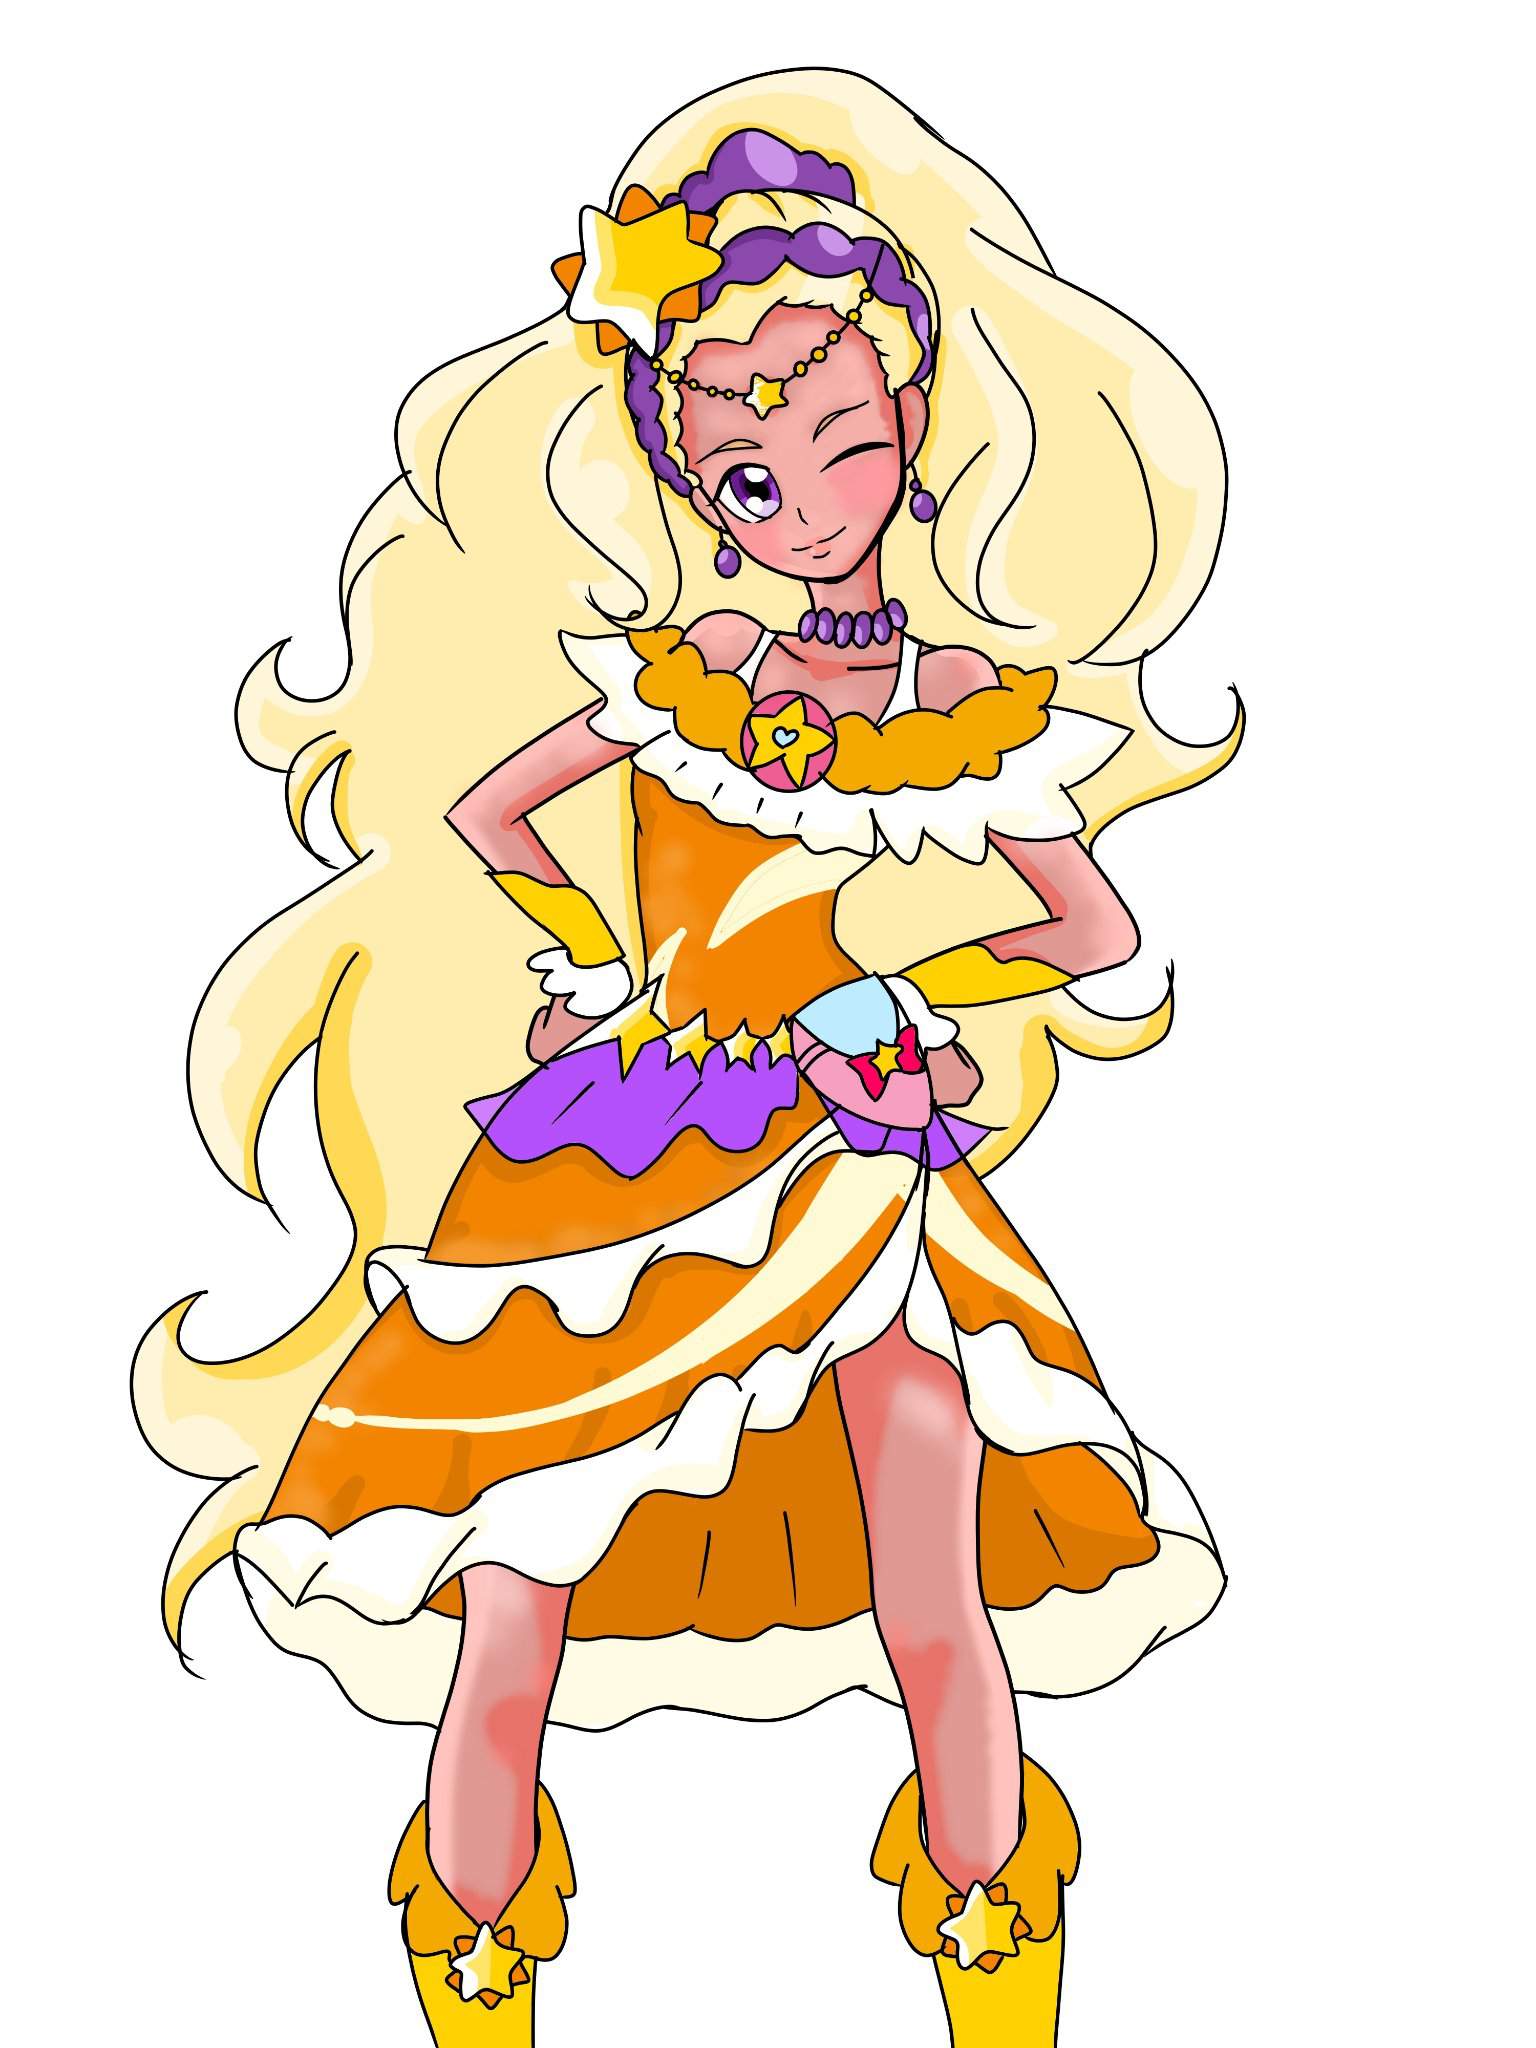 Cure Soleil and Cure Chocolat Drawings | Precure Amino